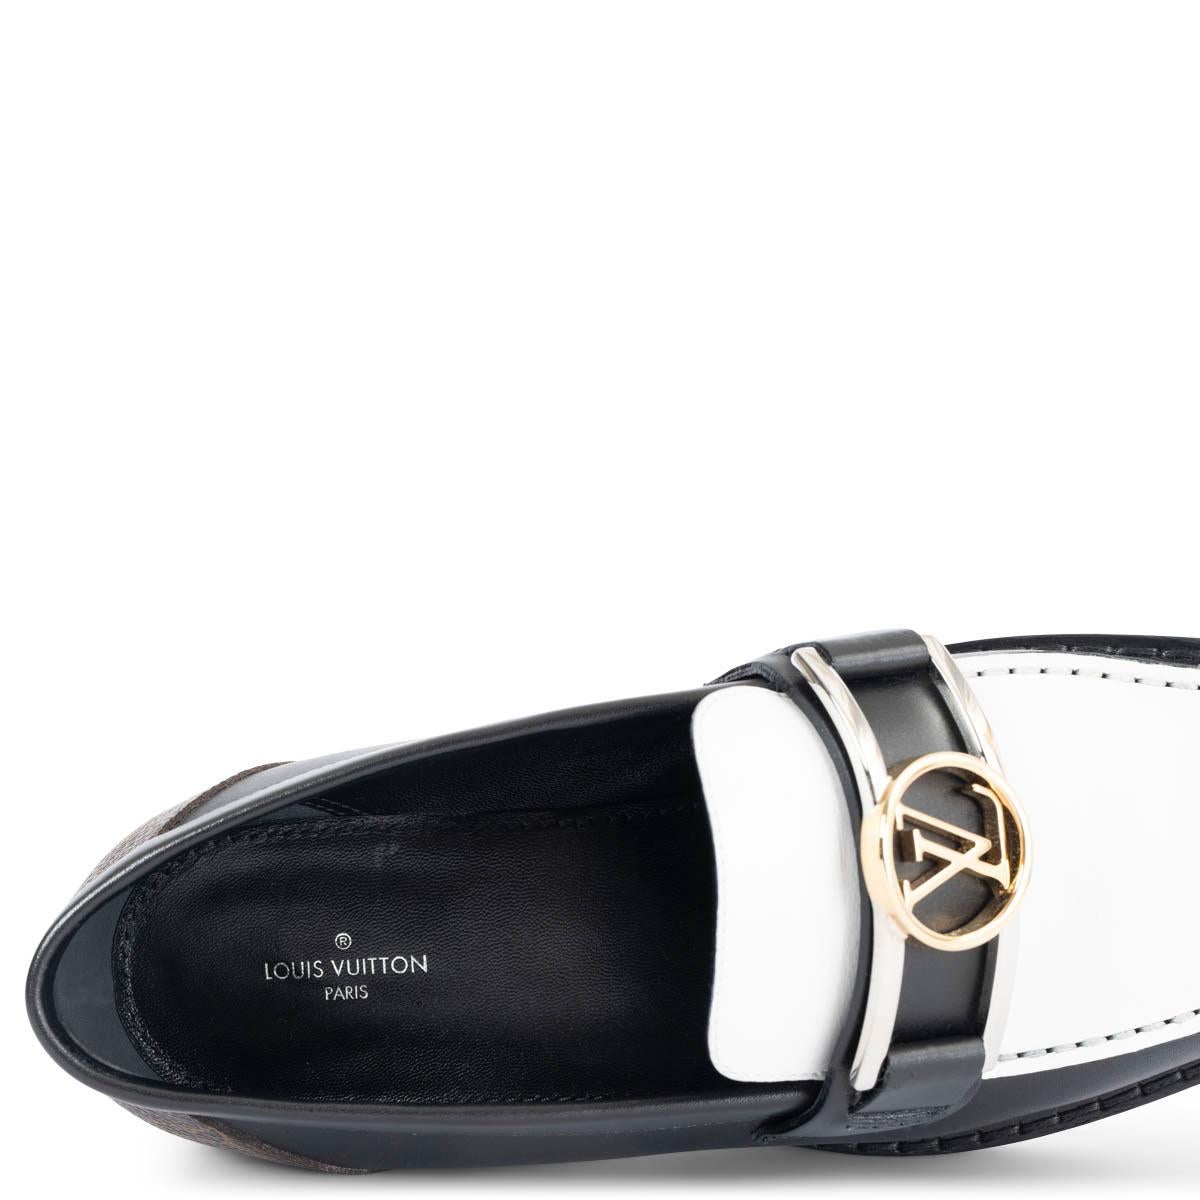 LOUIS VUITTON black & white leather ACADEMY Loafers Shoes 38.5 For Sale 2